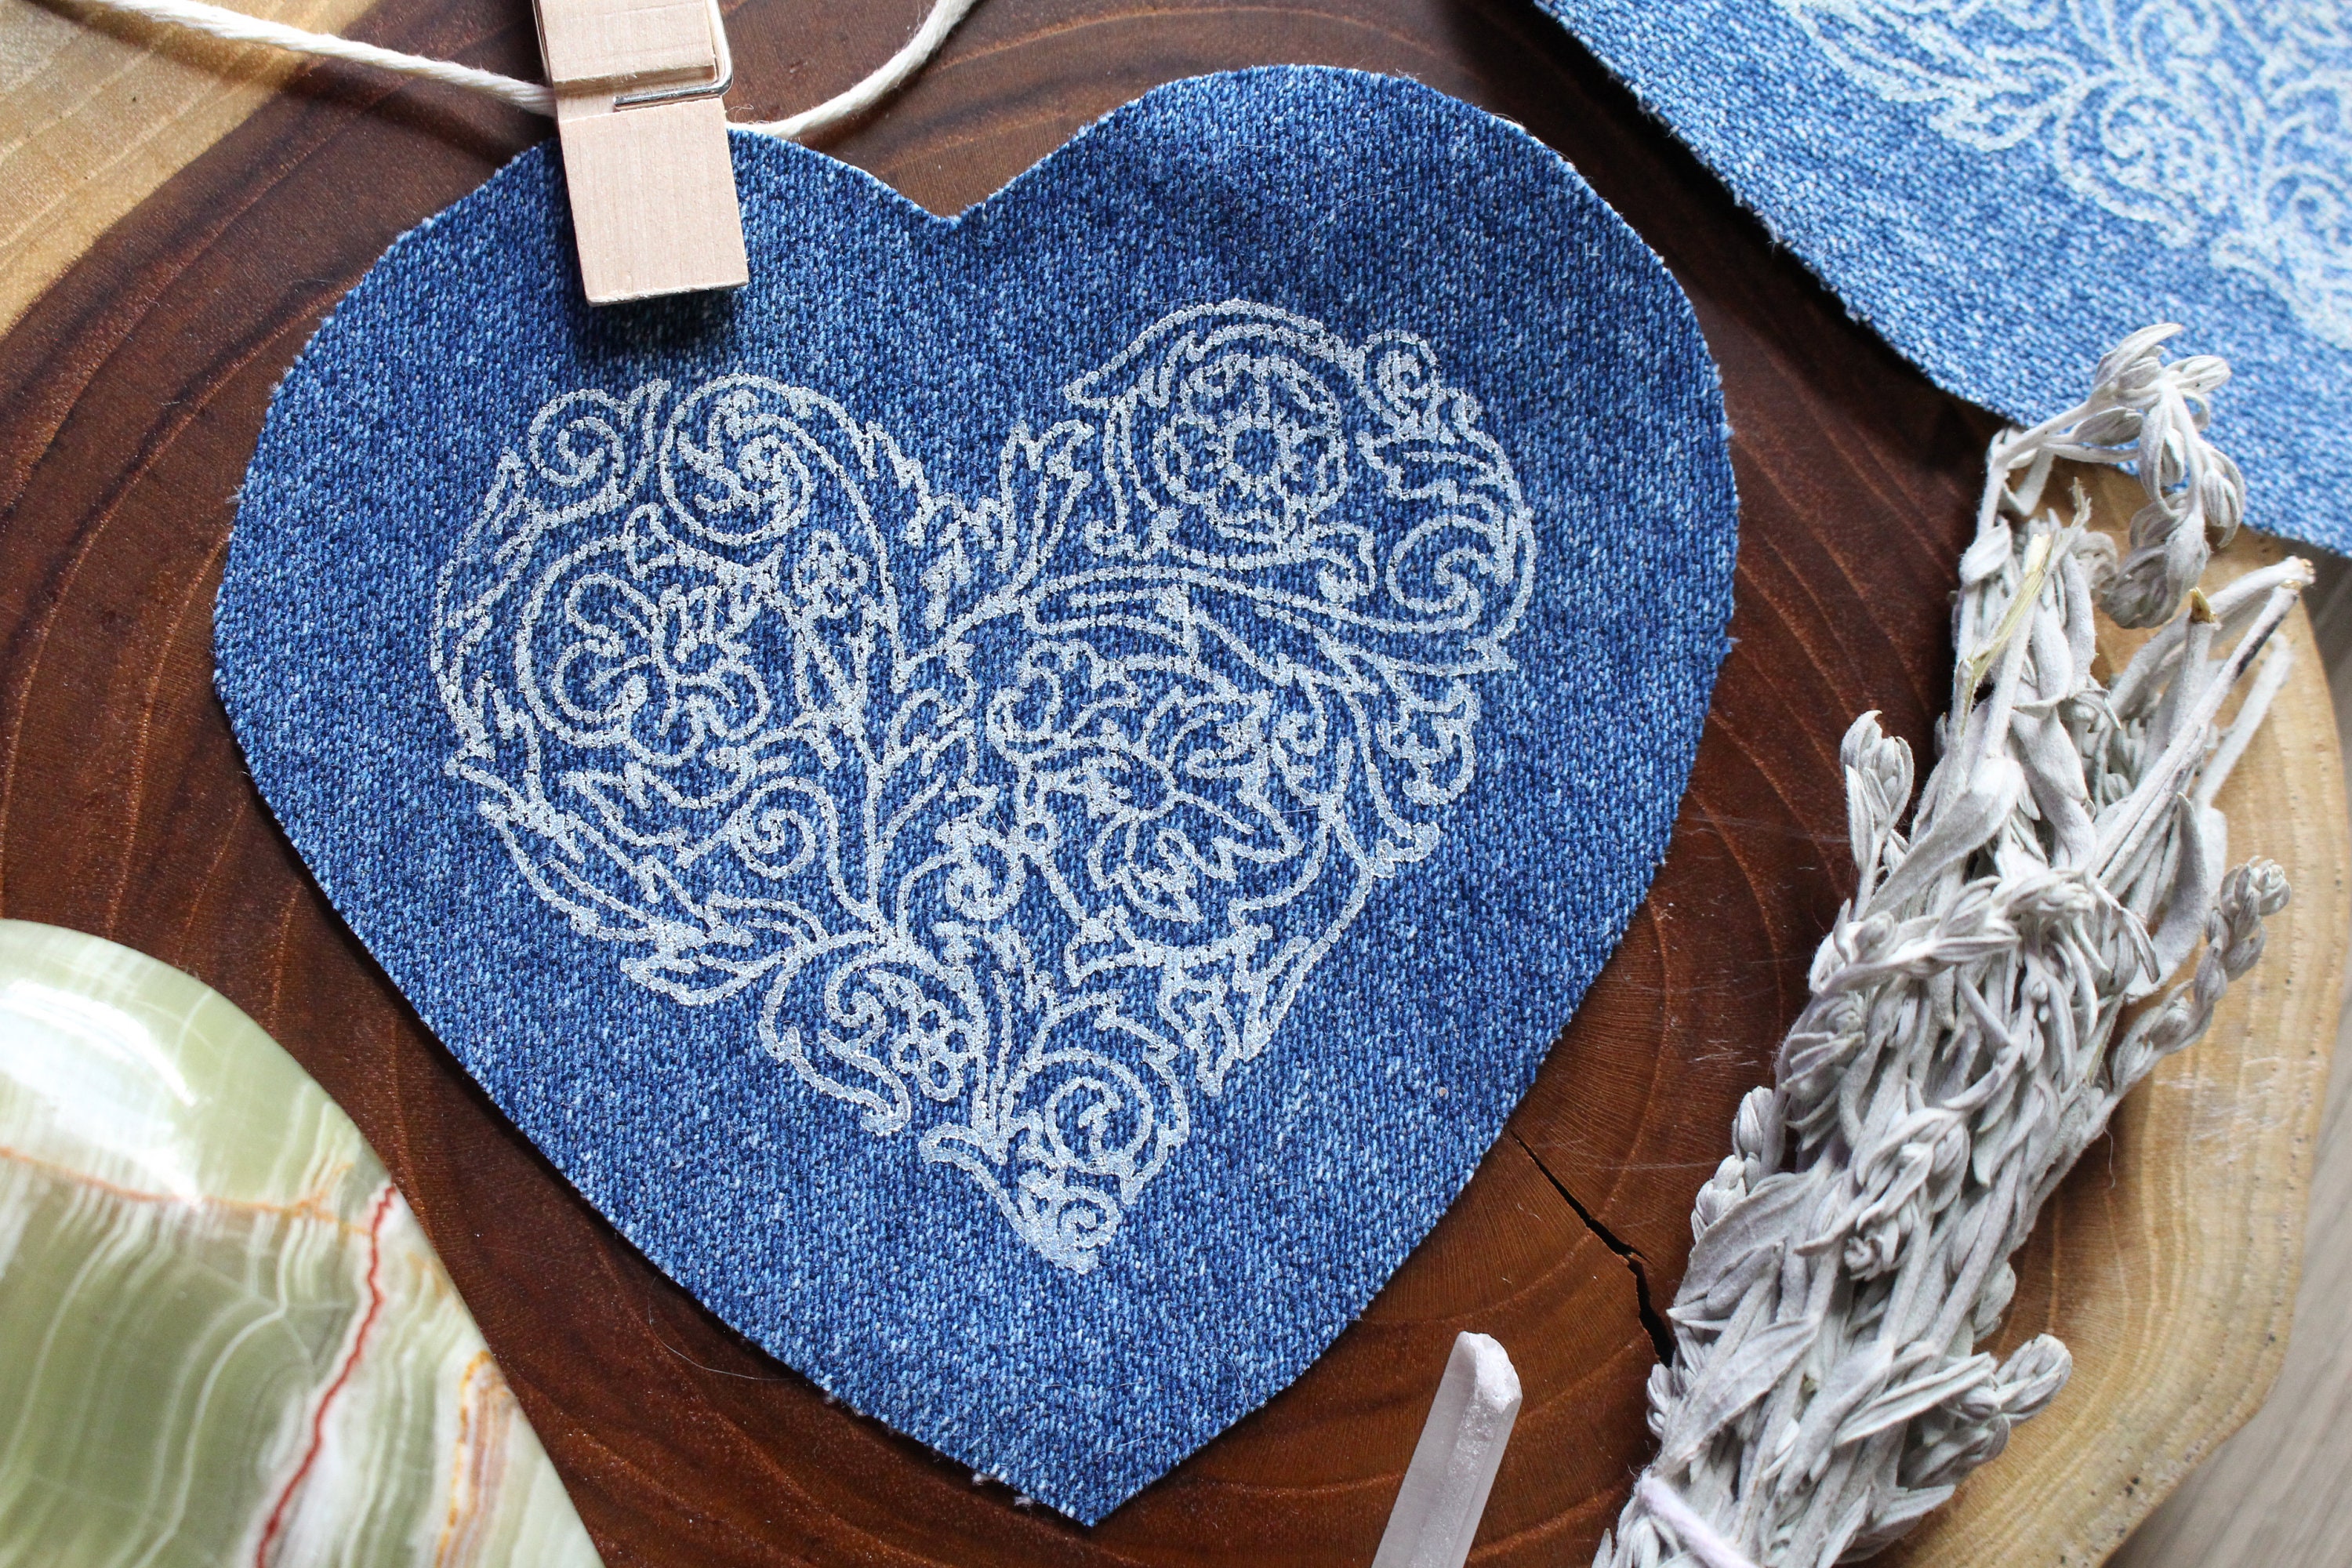  Zlettery 24pcs Blue Heart Iron on Patches, Heart Embroidered  Patches for Clothing, Jackets, Hats,Backpacks, Jeans : Arts, Crafts & Sewing